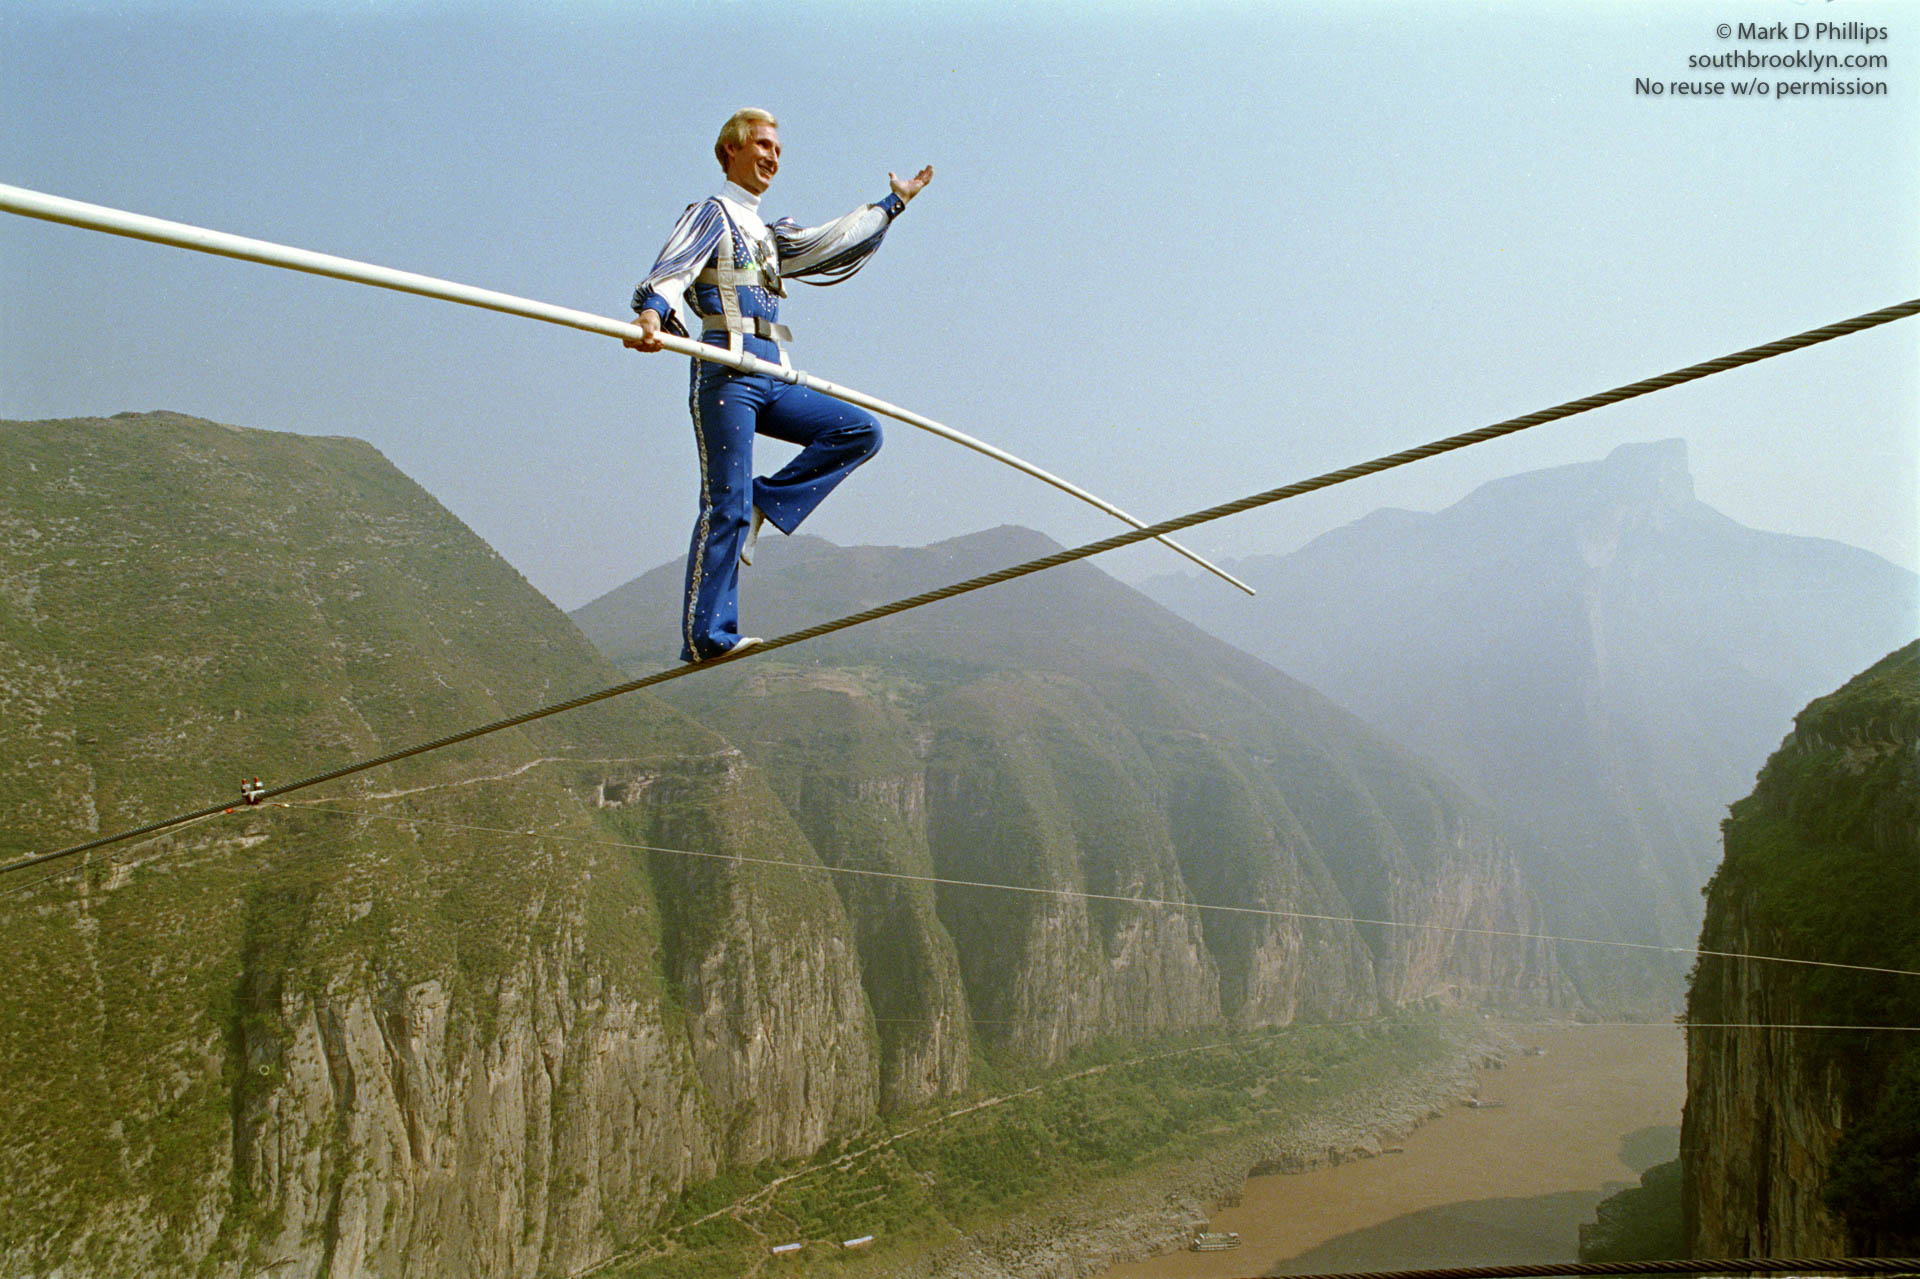 Jay Cochrane, The Prince of the Air, completes The Great China Skywalk over the Yangtze River in Qutang Gorge, China, on October 28, 1995. The skywalk was and is the greatest ever made spanning half a mile between the canyon walls and 1,350 feet above the river. ©Mark D Phillips NO RESALES OR REUSE WITHOUT PERMISSION/NO
ARCHIVING ©Mark D. Phillips